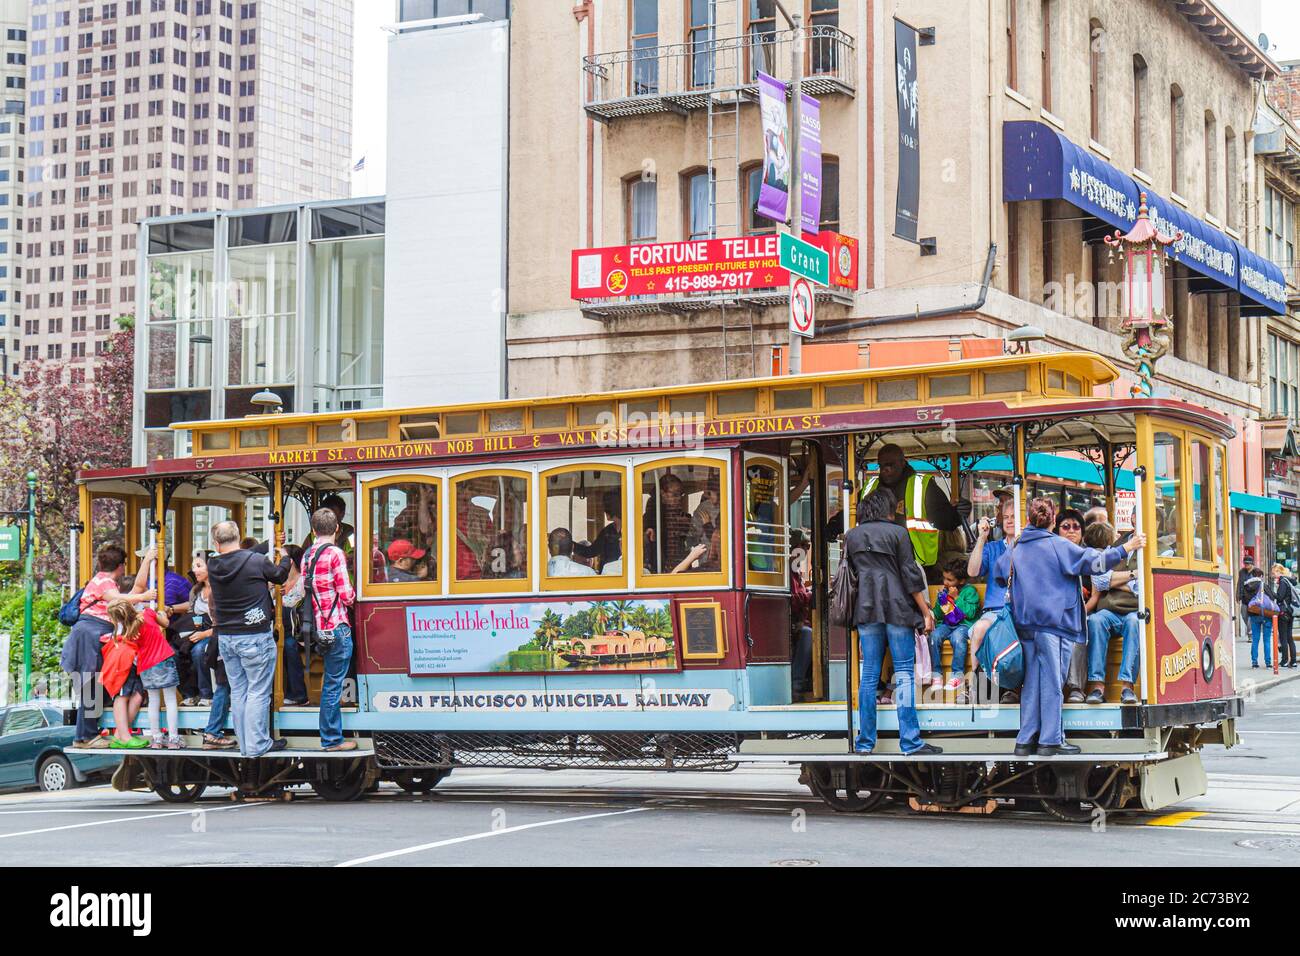 San Francisco California,Chinatown,Grant Street,transit system,cable car cars,passenger passengers rider riders,outside exterior front,entrance,holdin Stock Photo